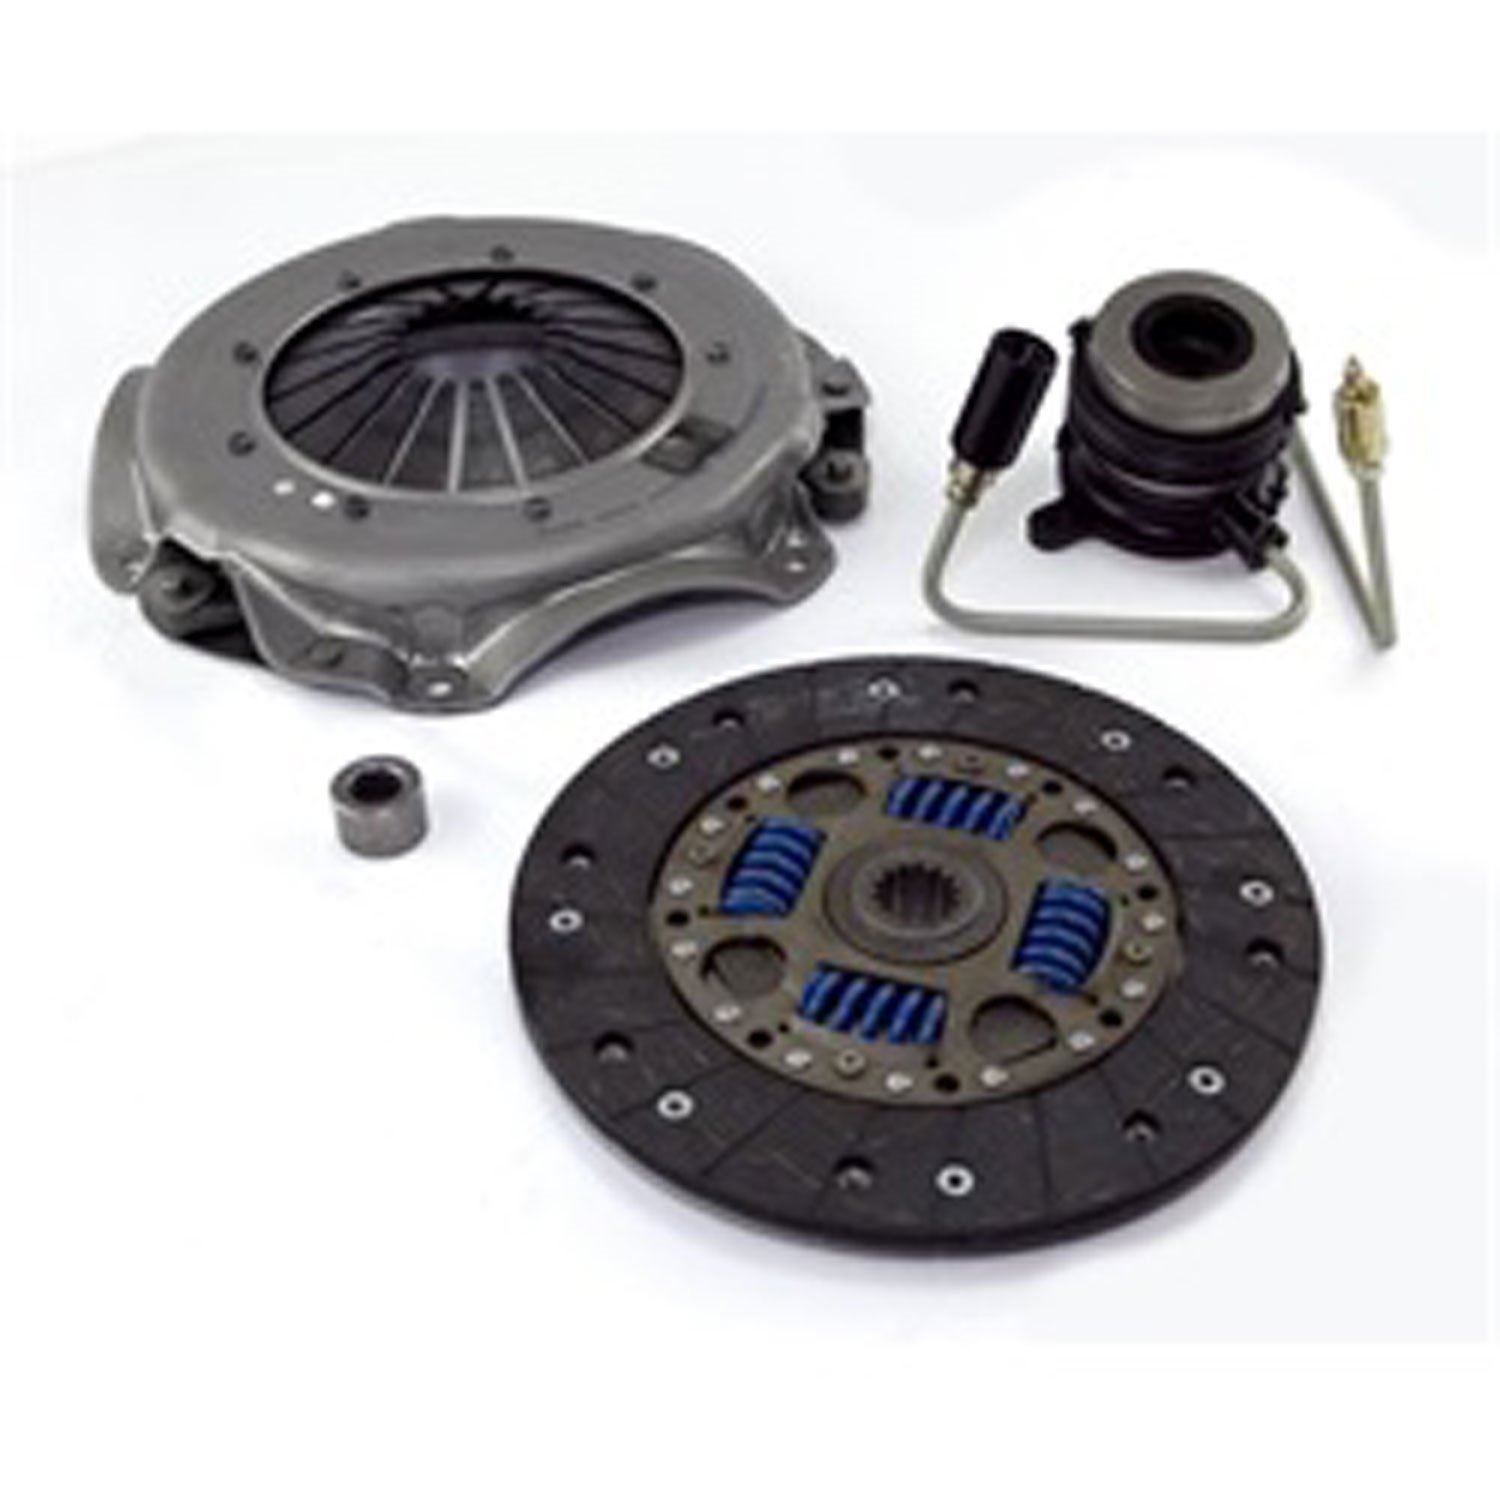 Master Clutch Kit 91-92 Cherokees and Wranglers 2.5L. Master kit includes pressure plate clutch disc